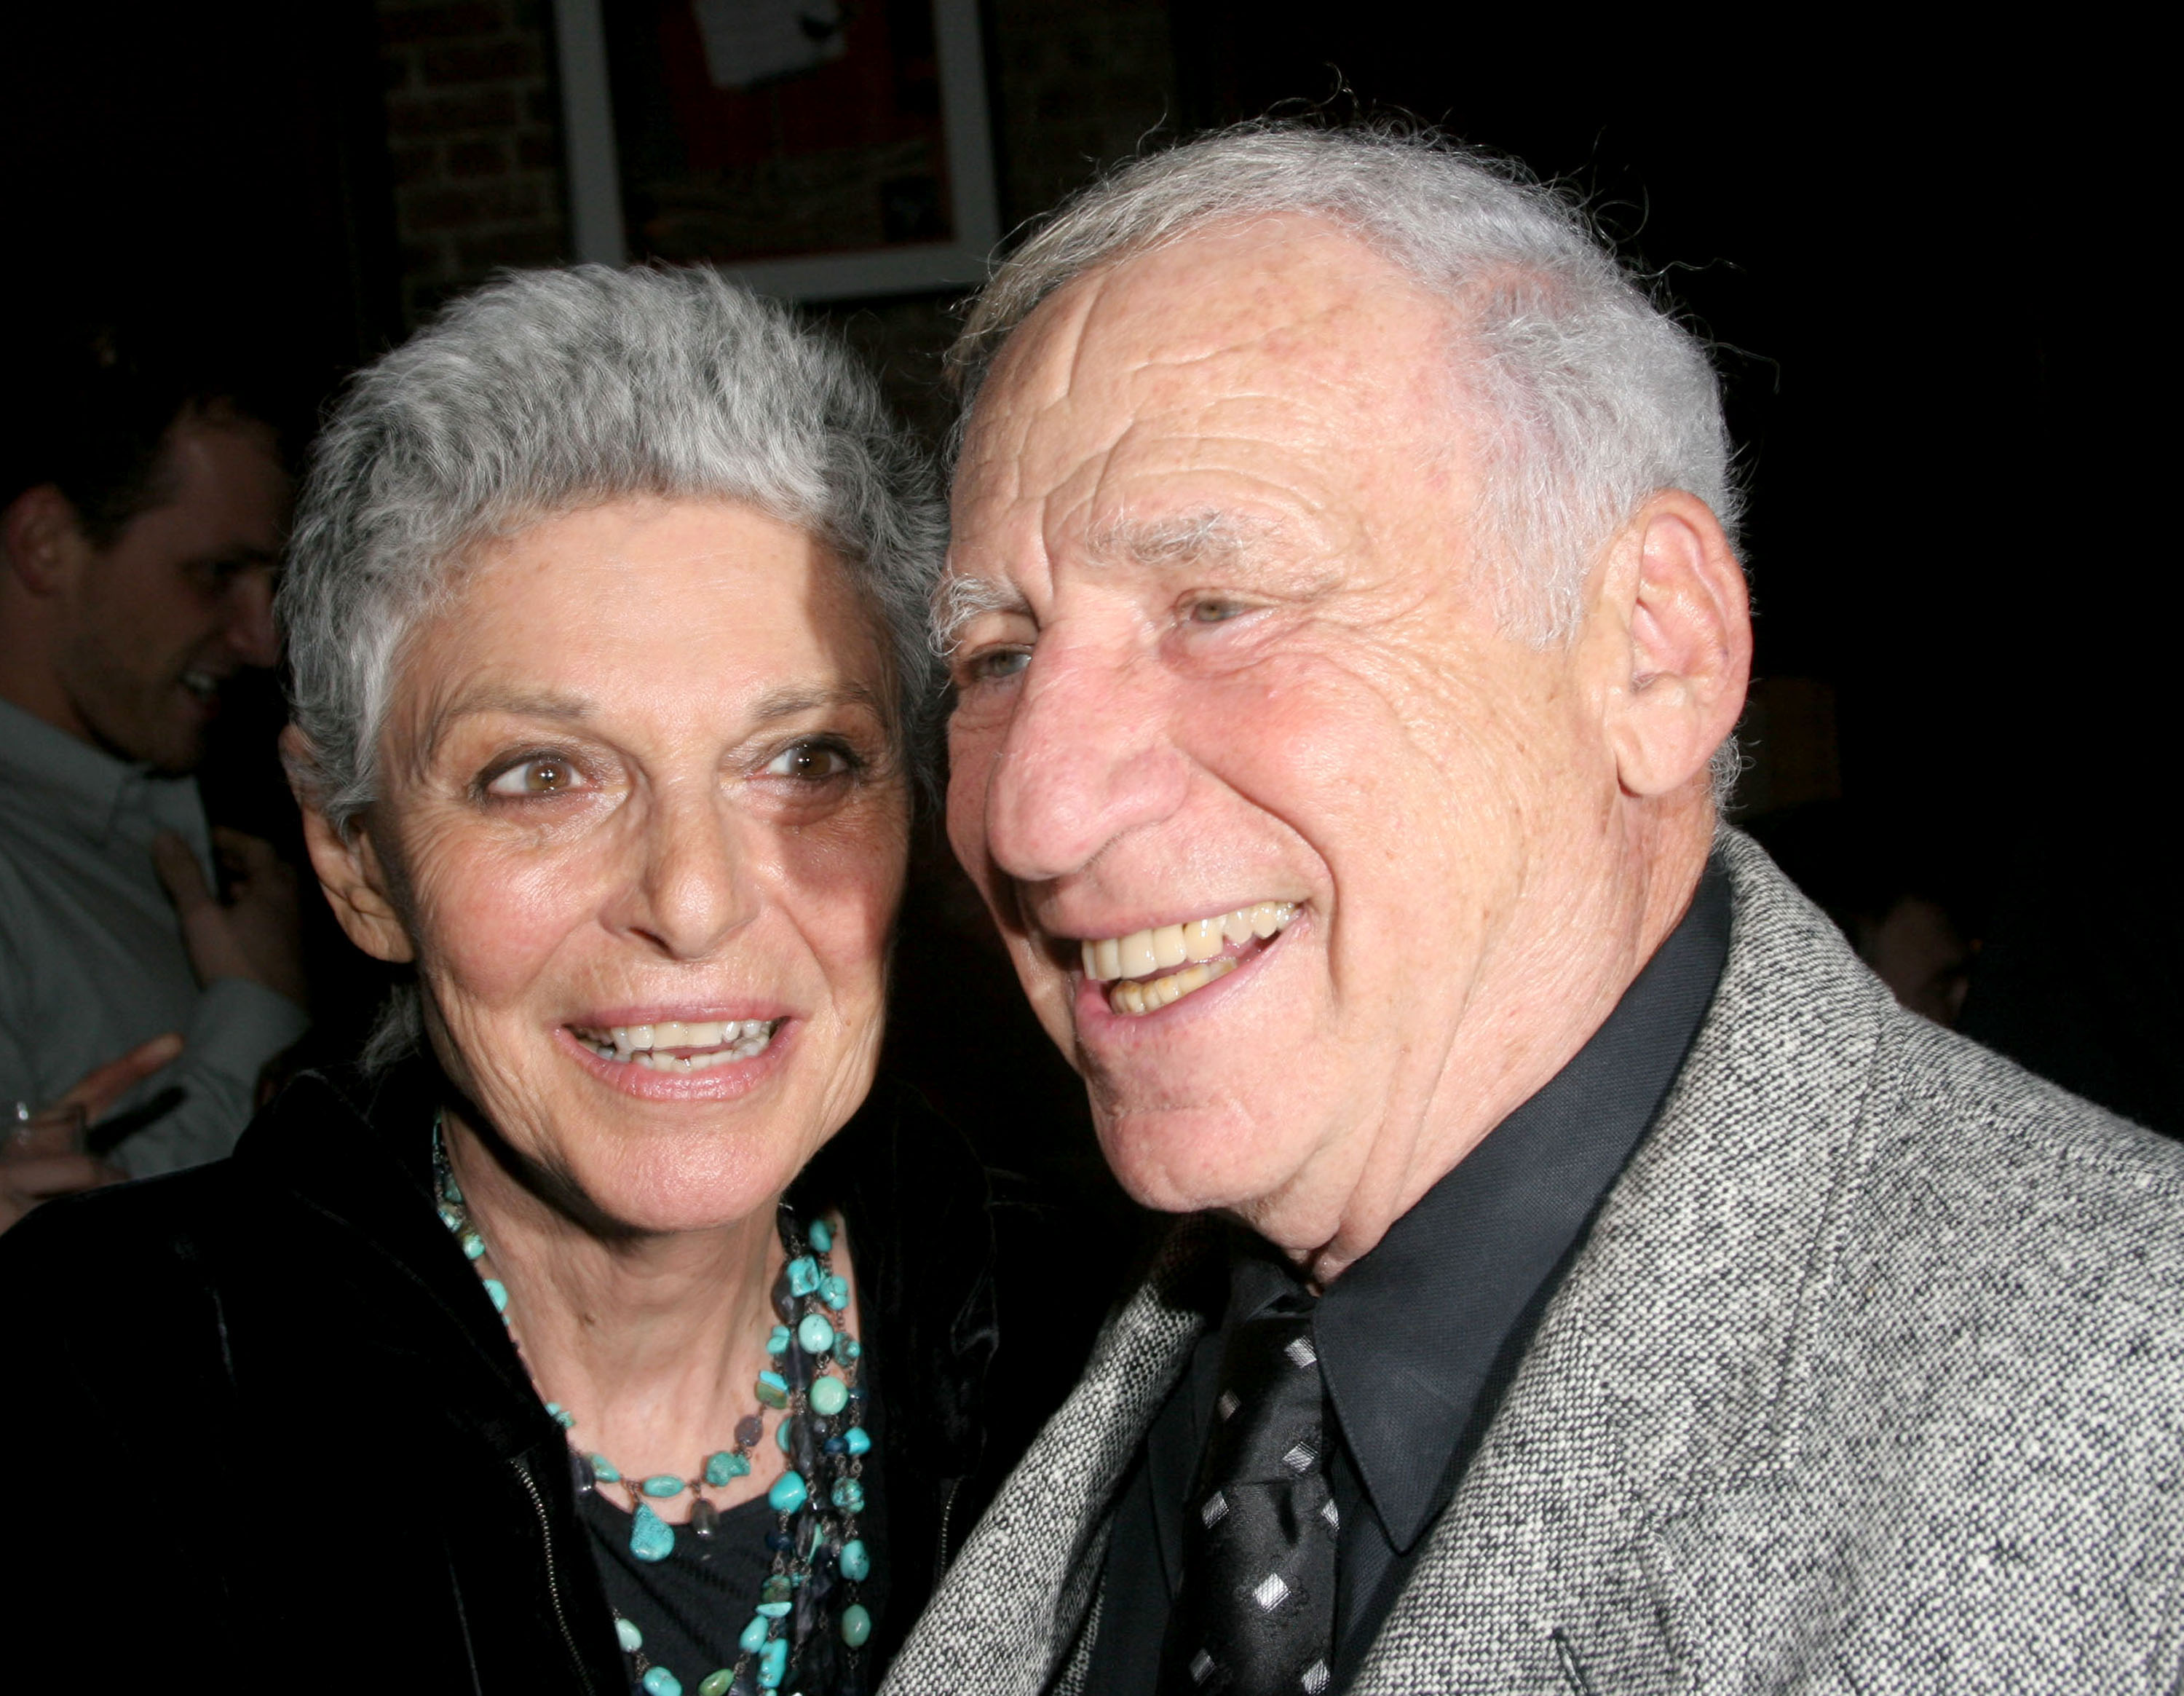 Mel Brooks and Anne Bancroft at the St. James Theater and Angus McIndoe Restaurant in New York City. | Source: Getty Images